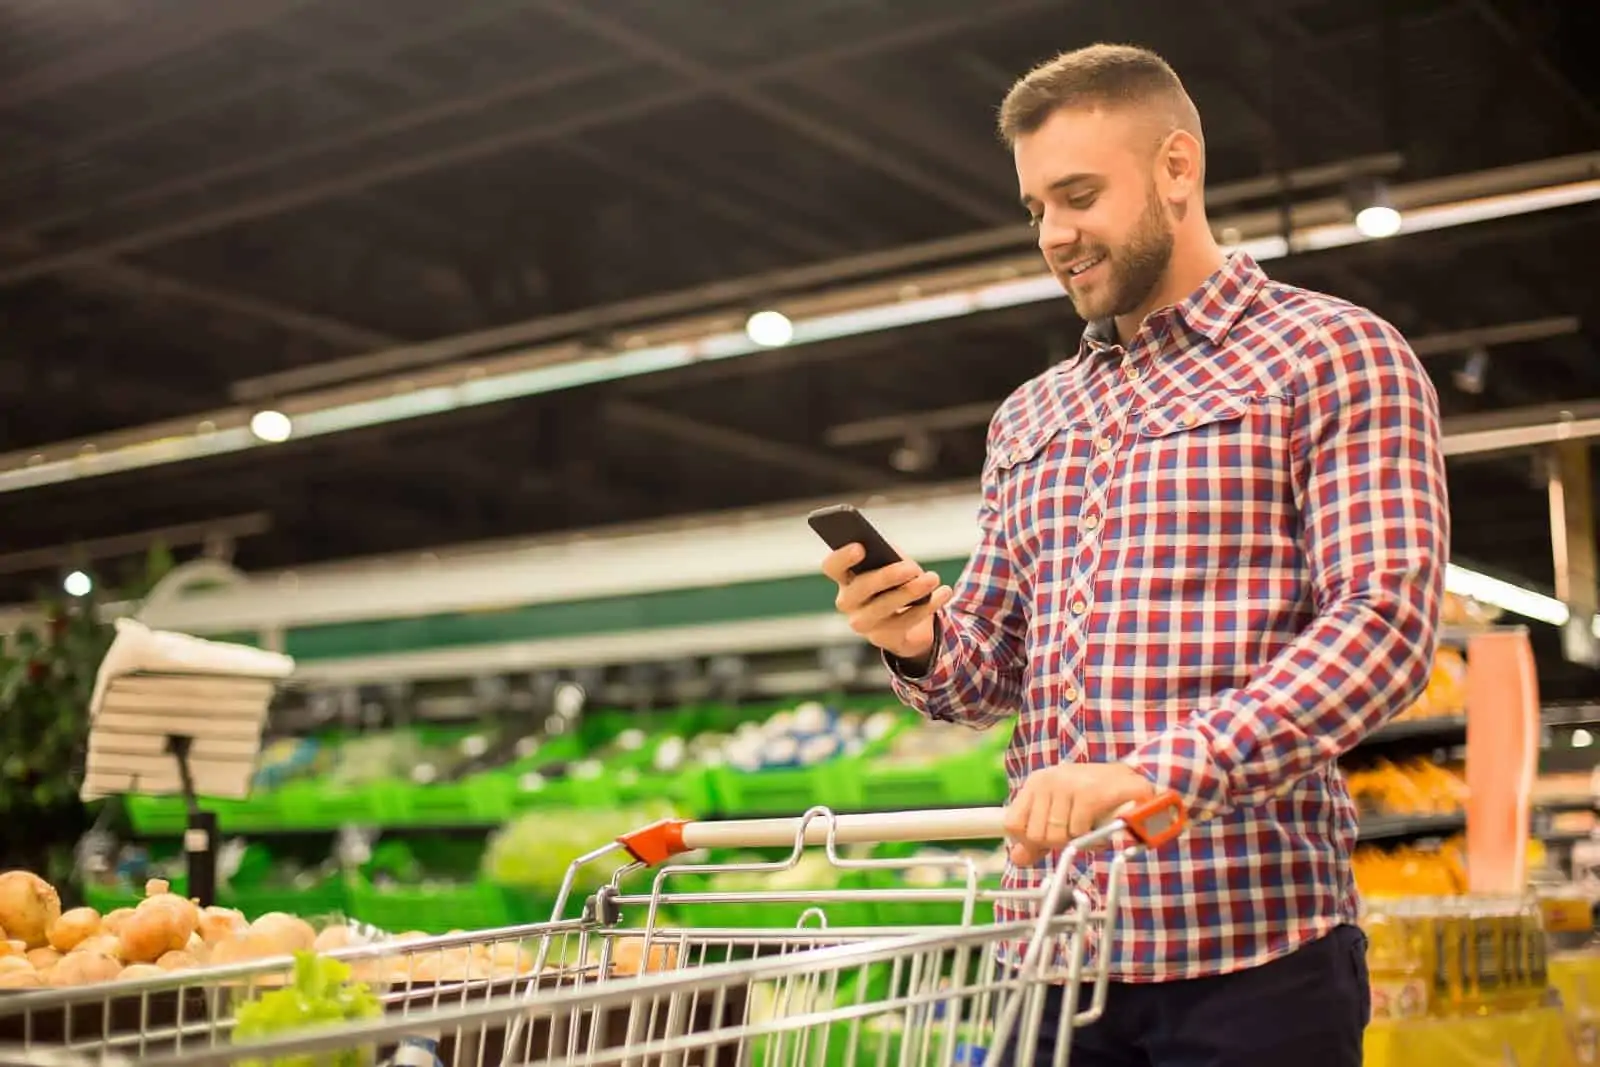 Instacart phone number: A shopper in a grocery store makes a phone call